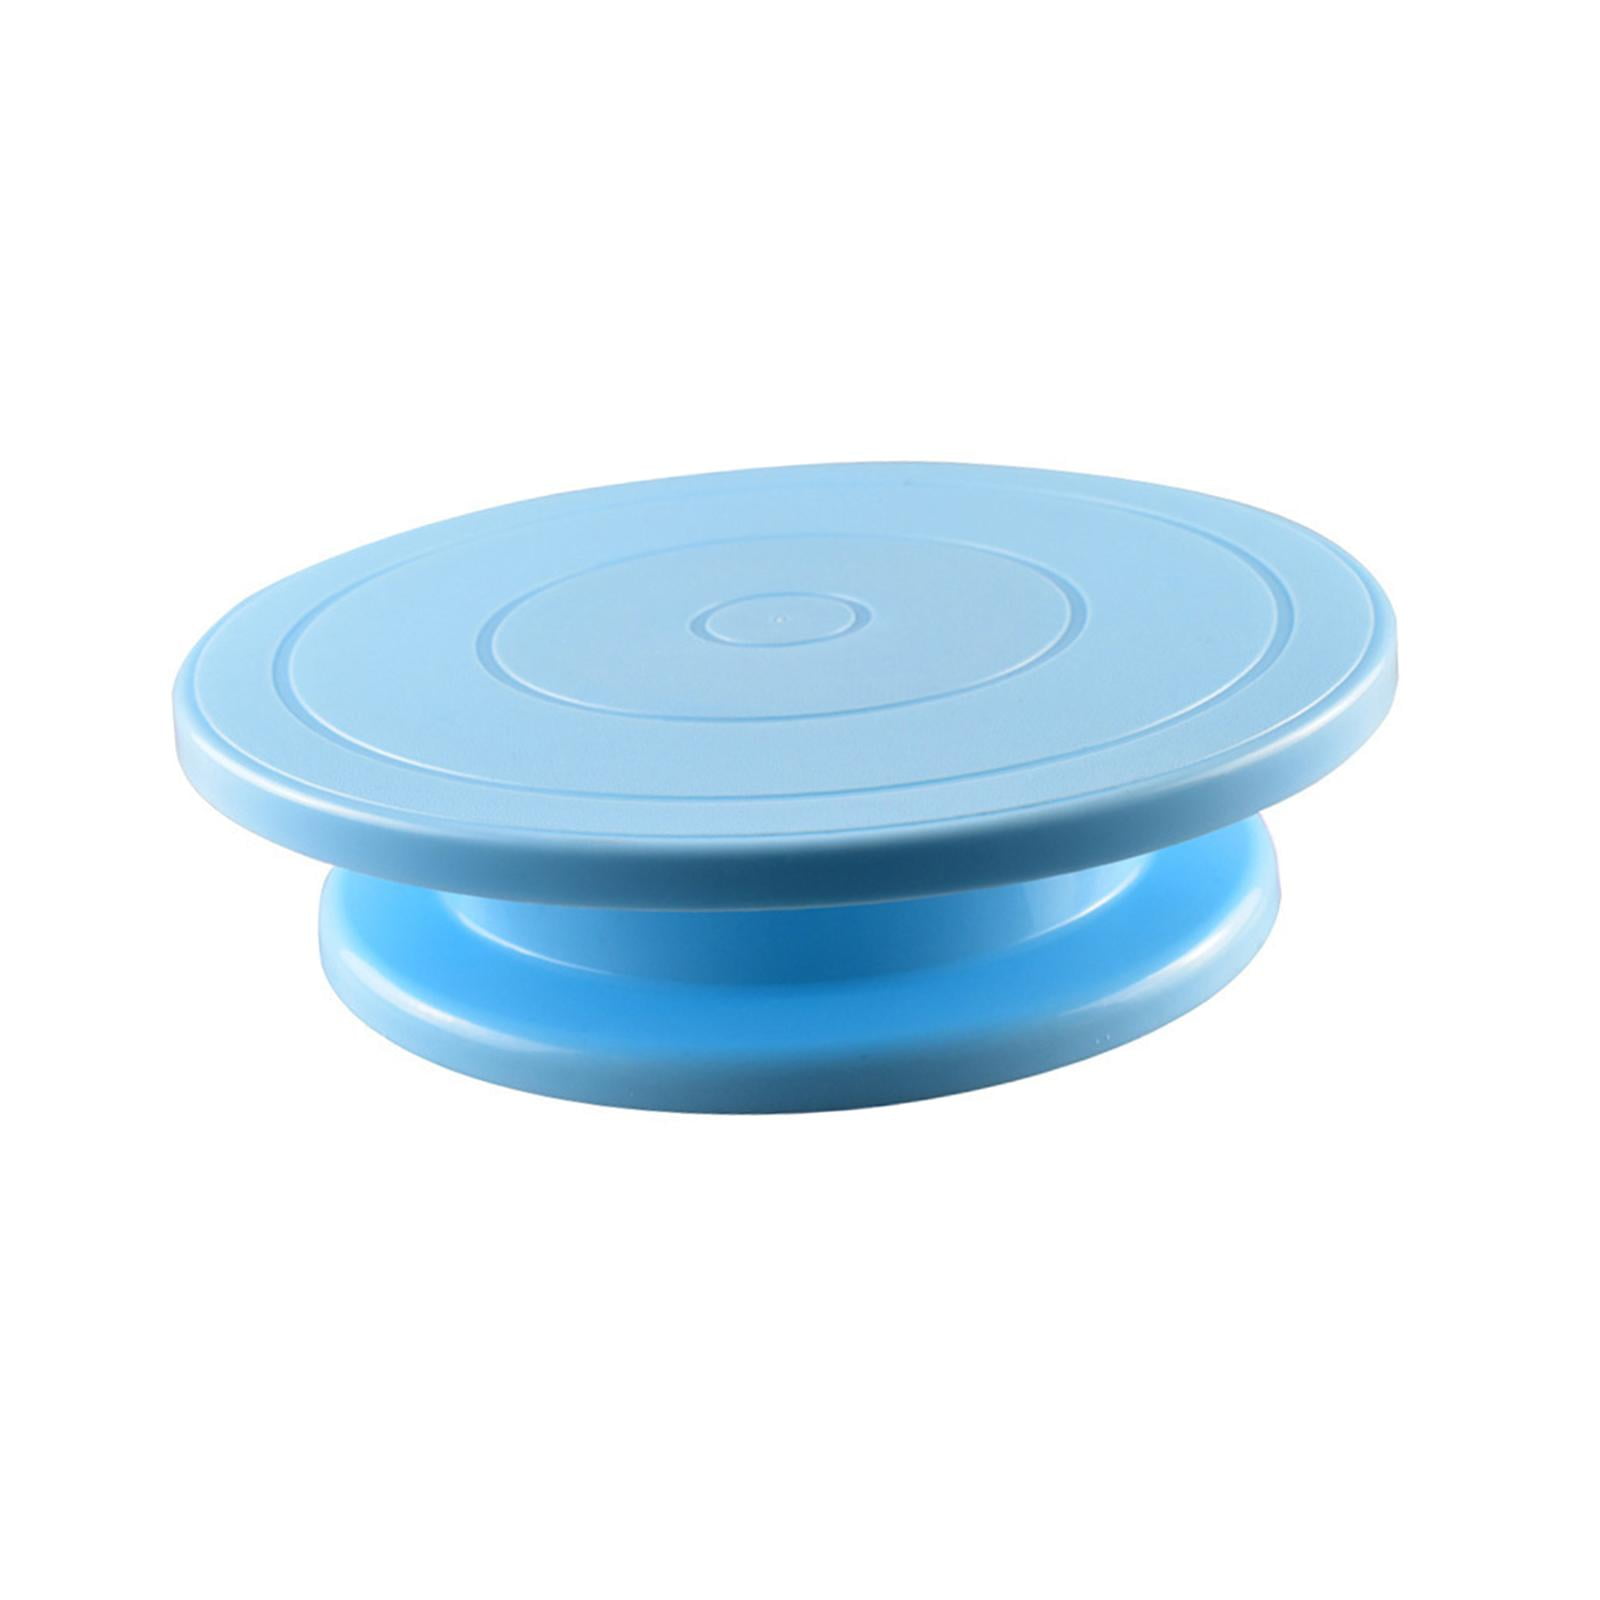 Cake Turntable, Durable Stable Revolving Cake Decorating Stand 10 Inch for  Chefs for Cake Decorating Supplies (Blue)